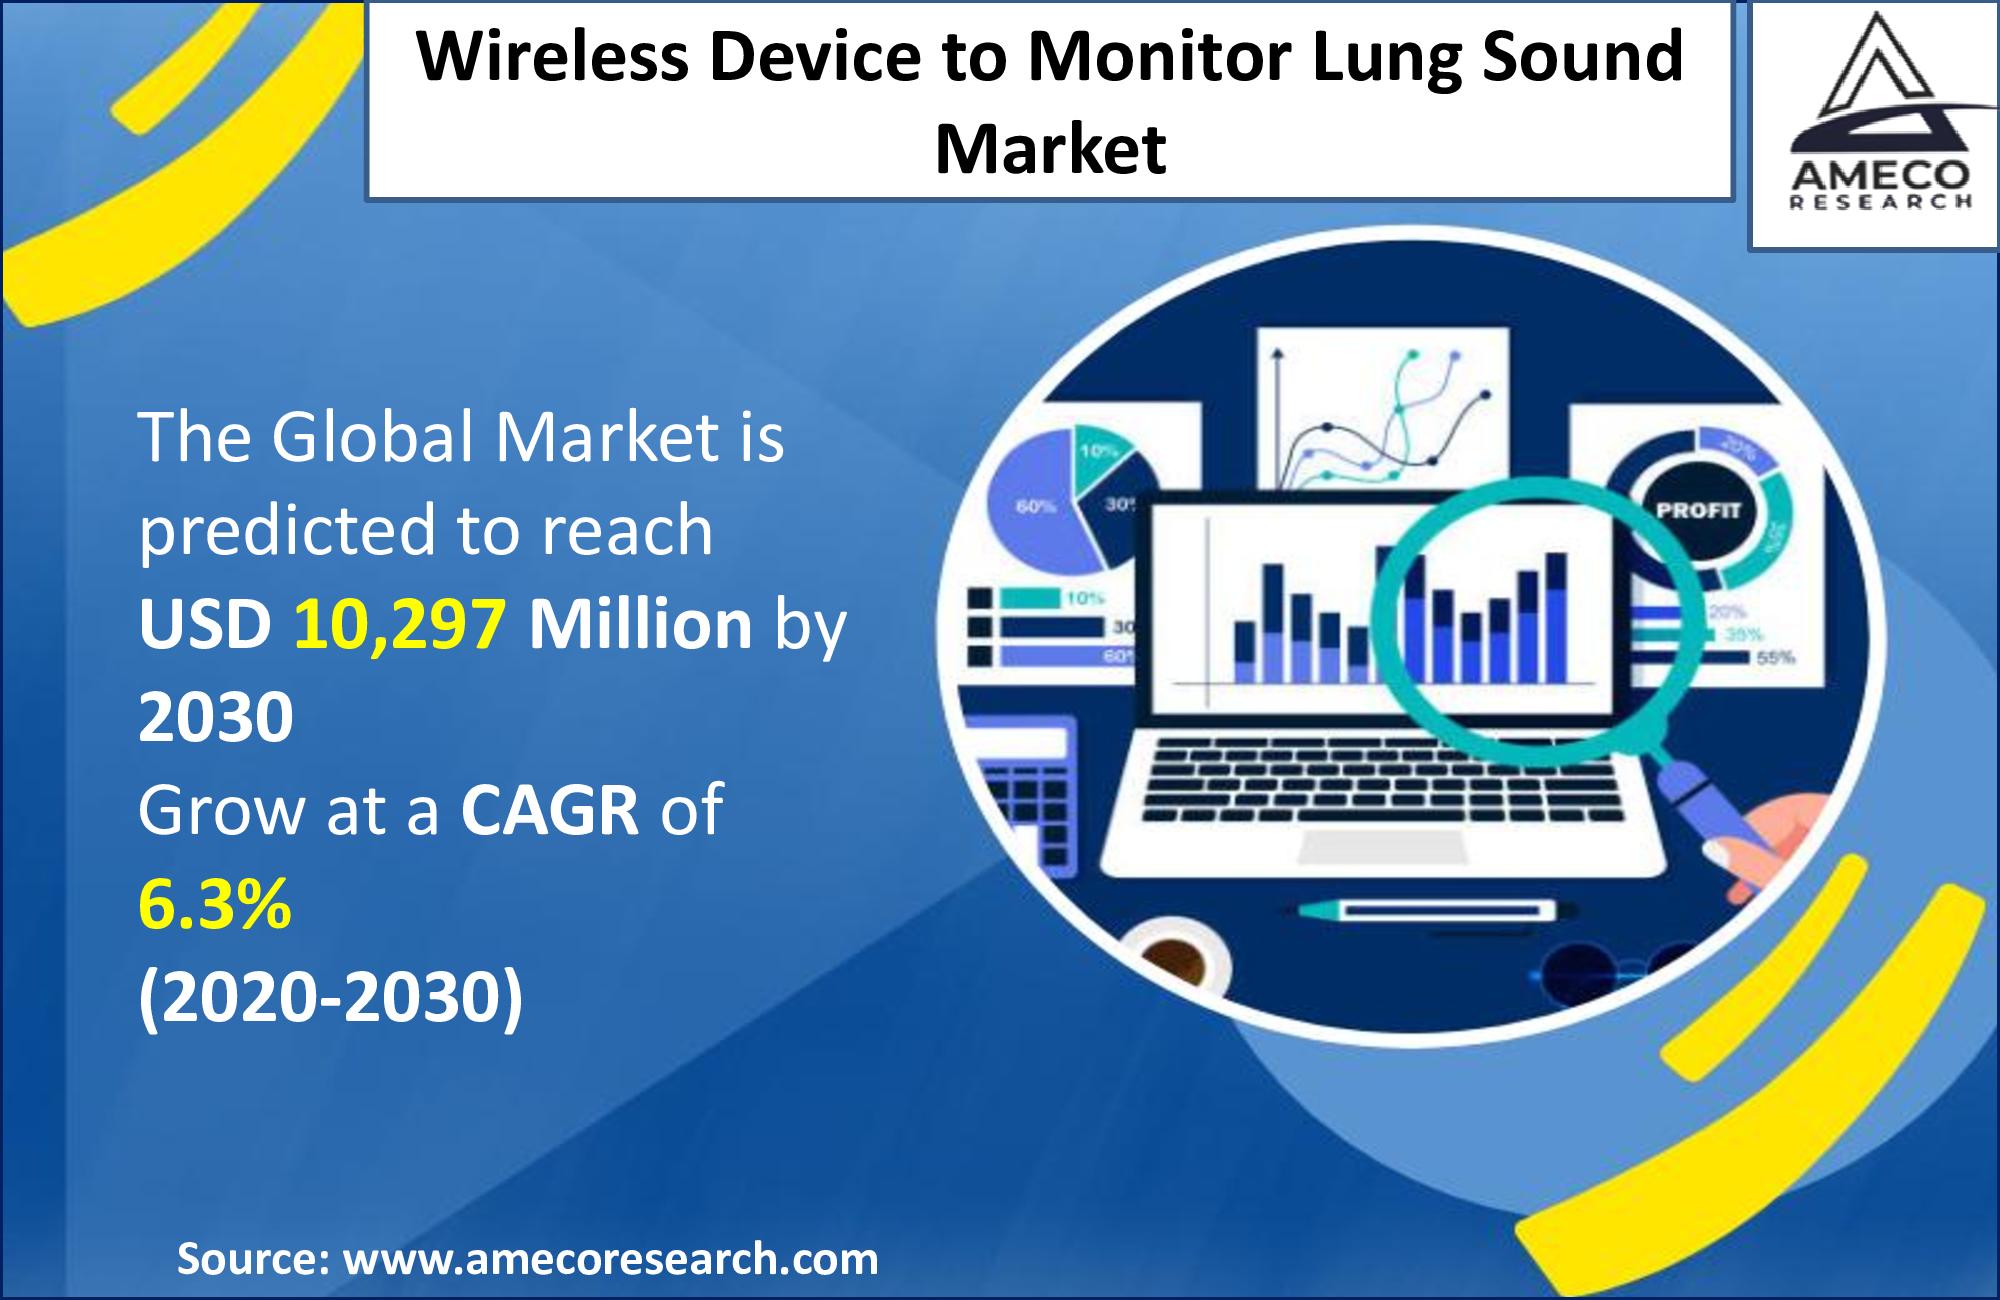 Wireless Device to Monitor Lung Sound Market